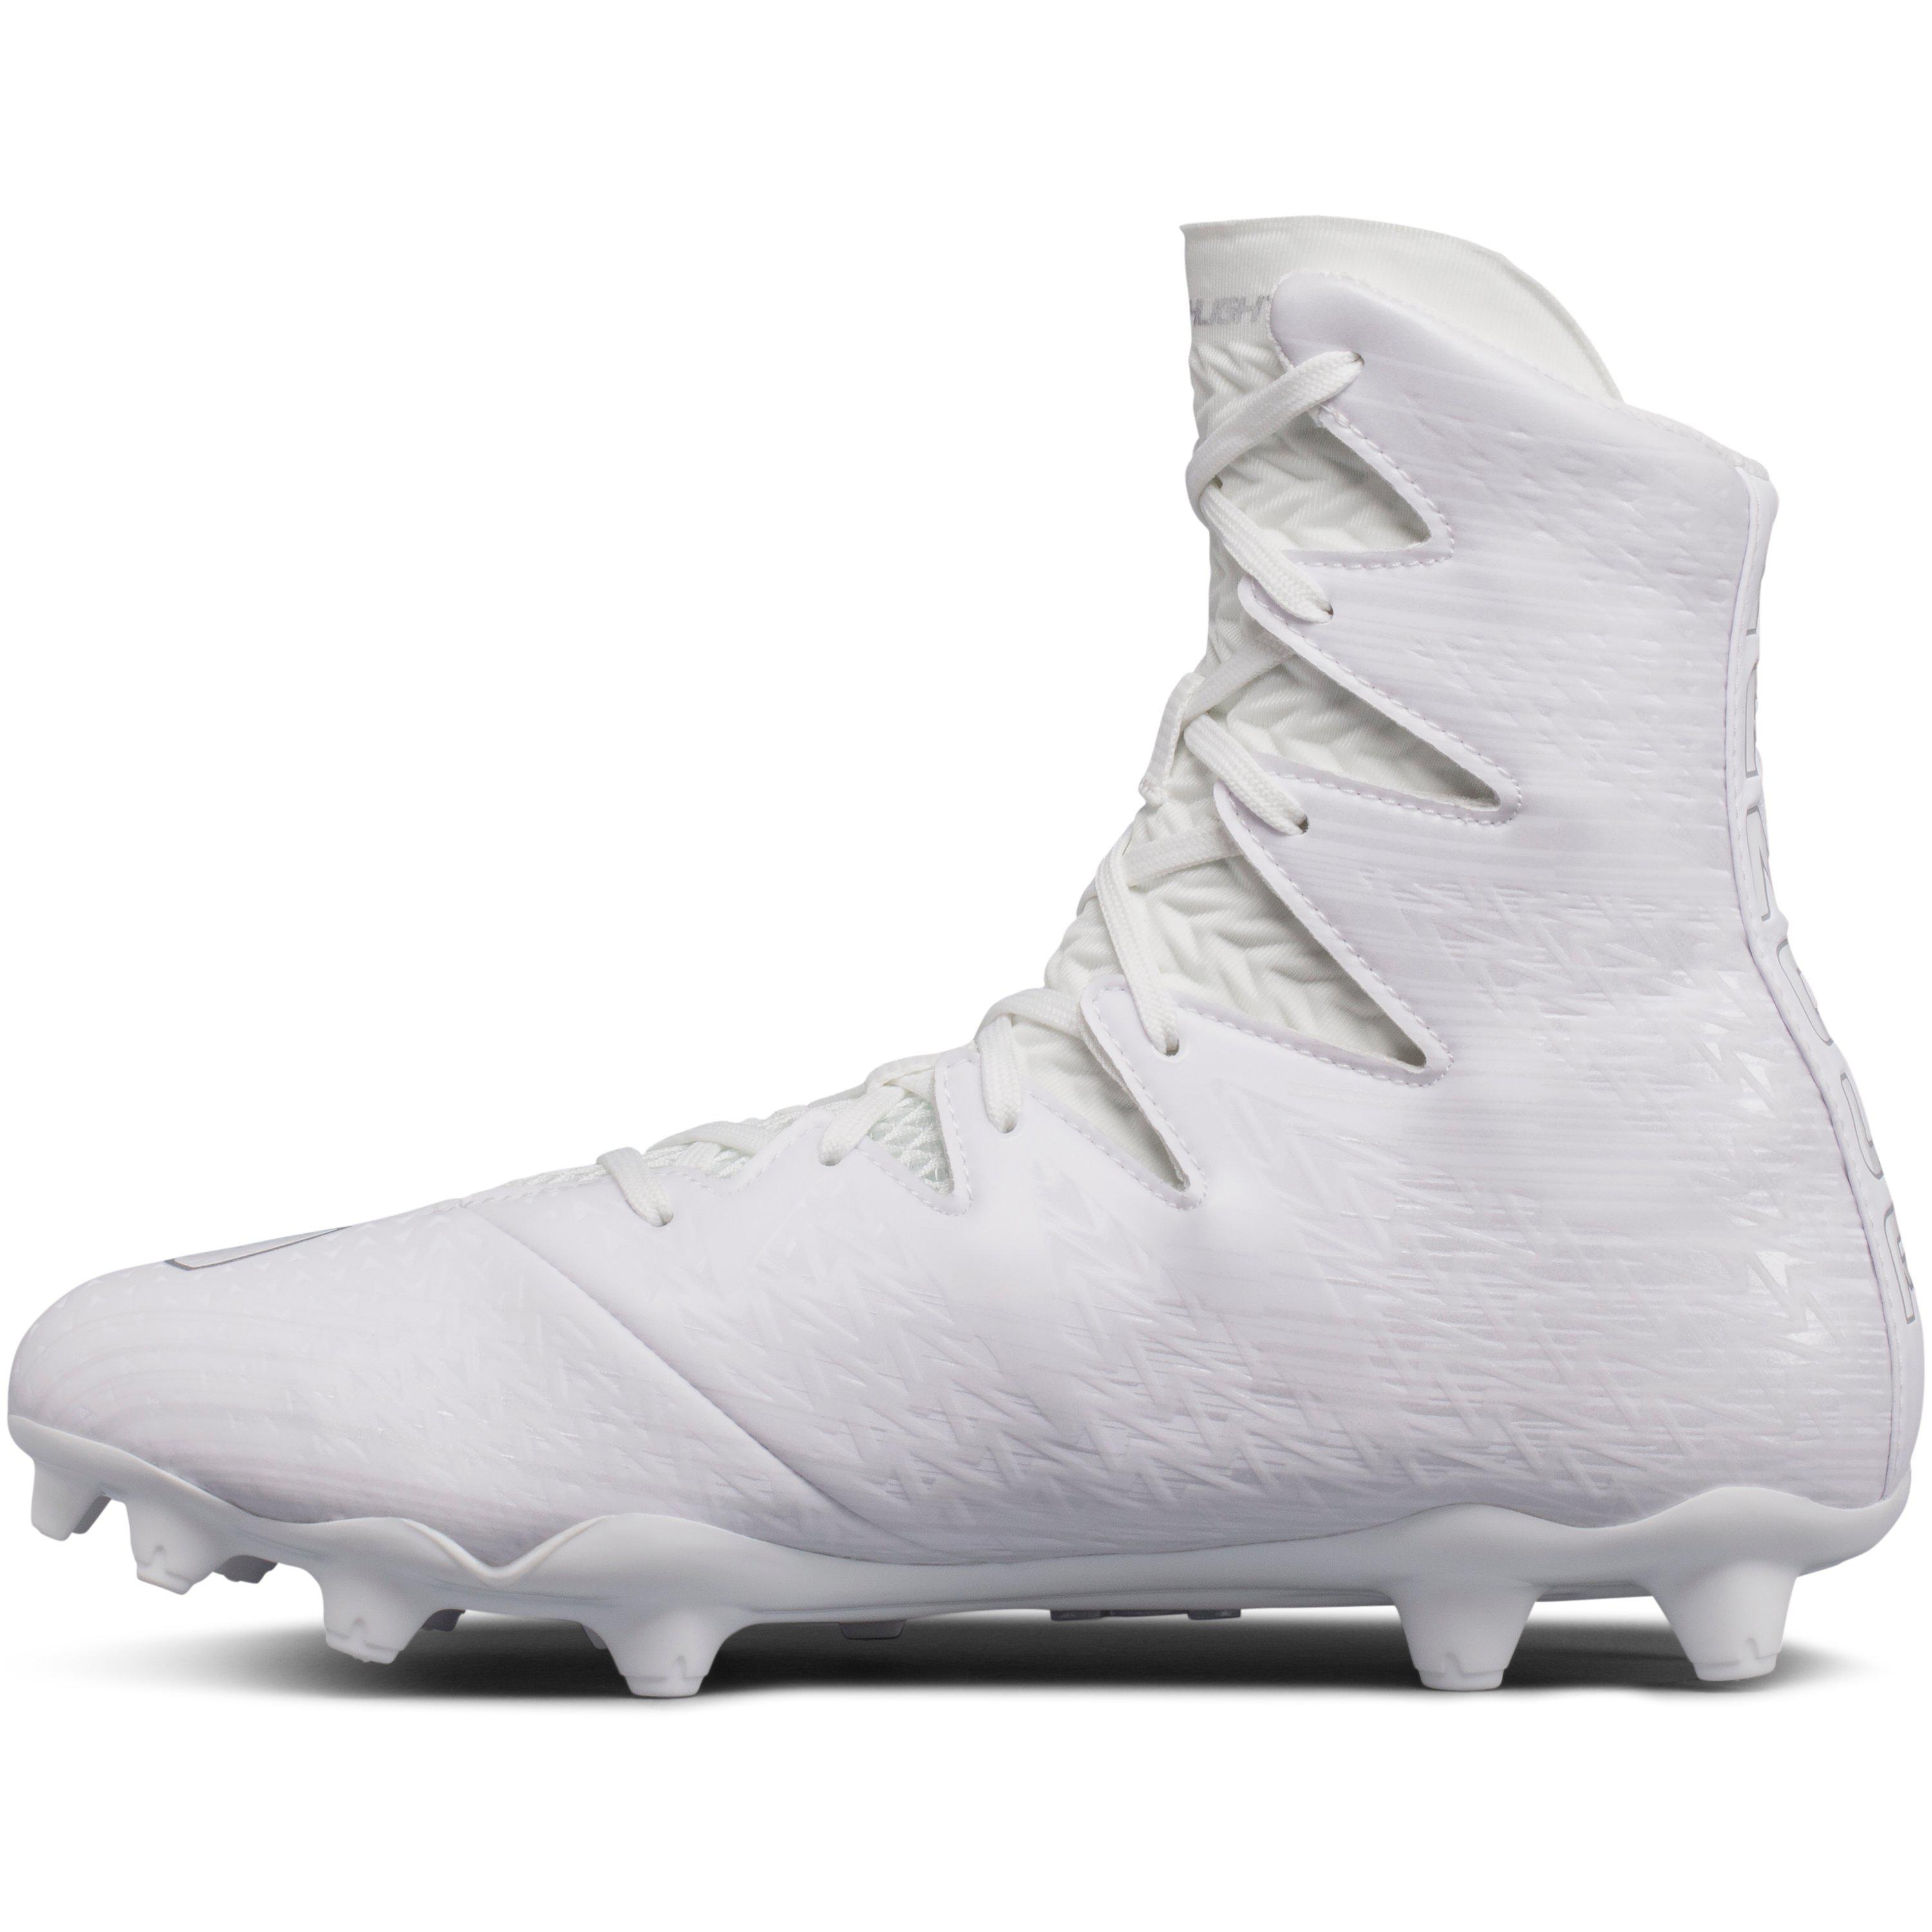 SIZES $120 NEW Under Armour Highlight MC Football Lacrosse Cleats ALL COLORS 